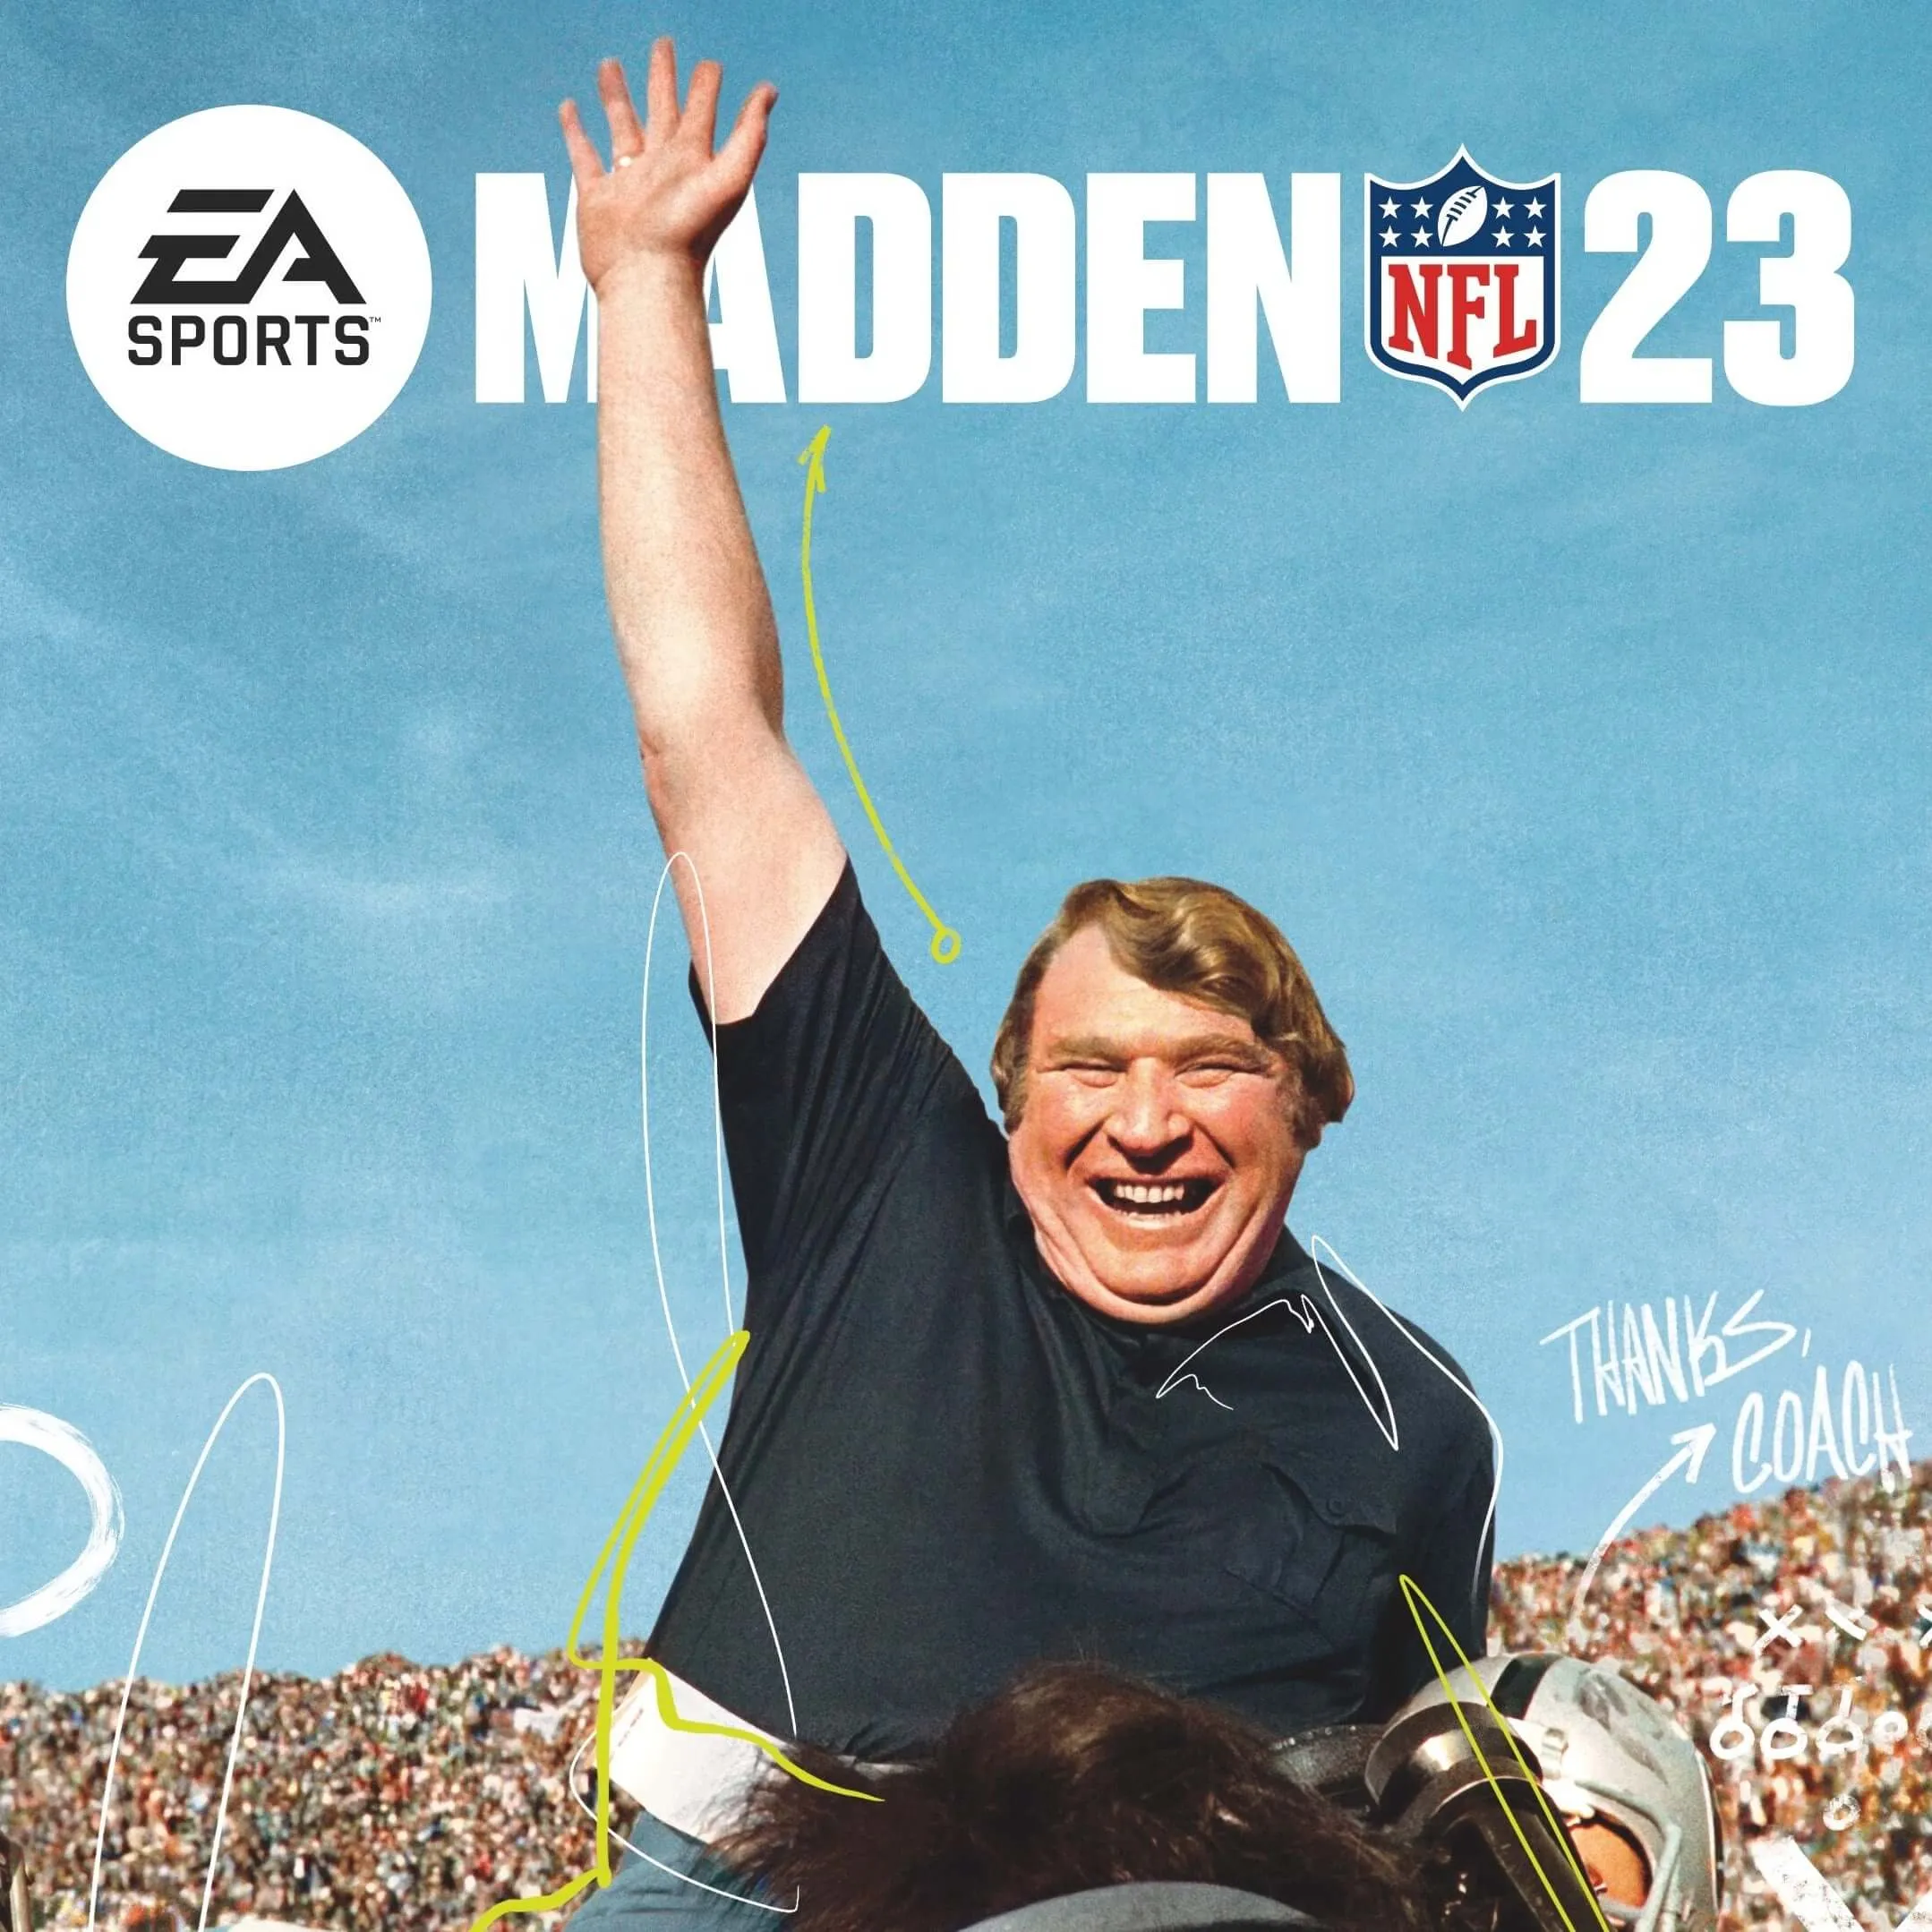 Madden NFL 2025 Release Date